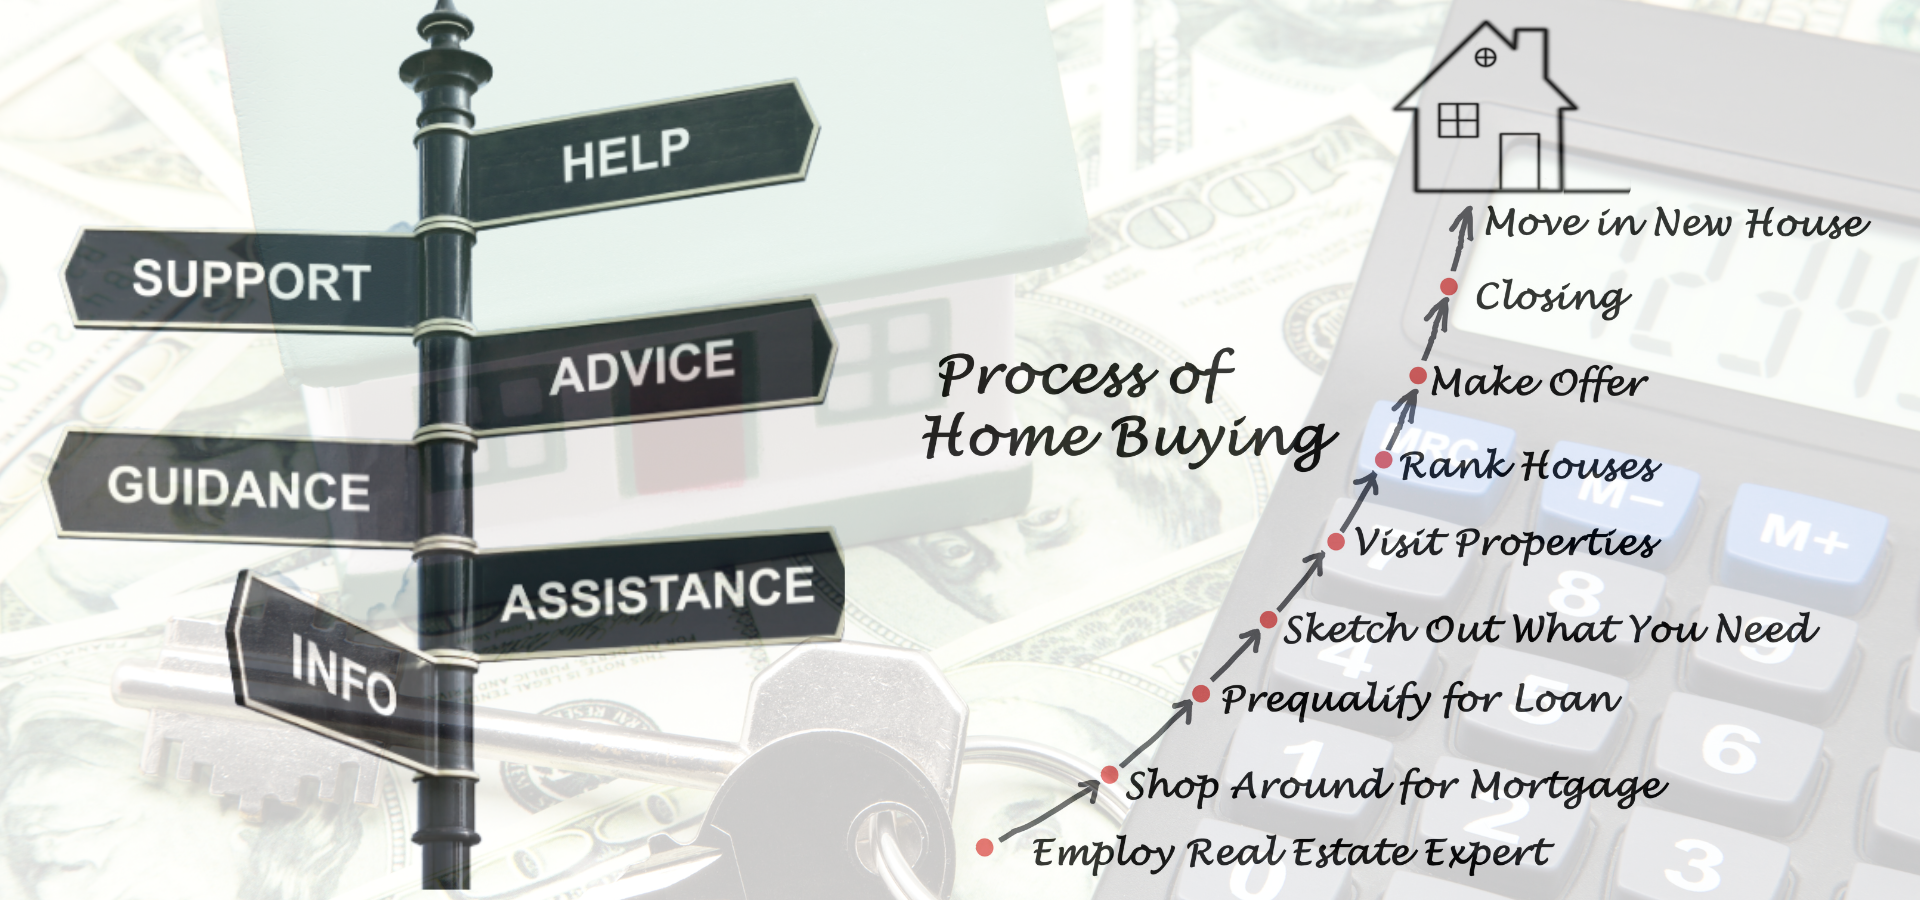 Process Of Home Buying